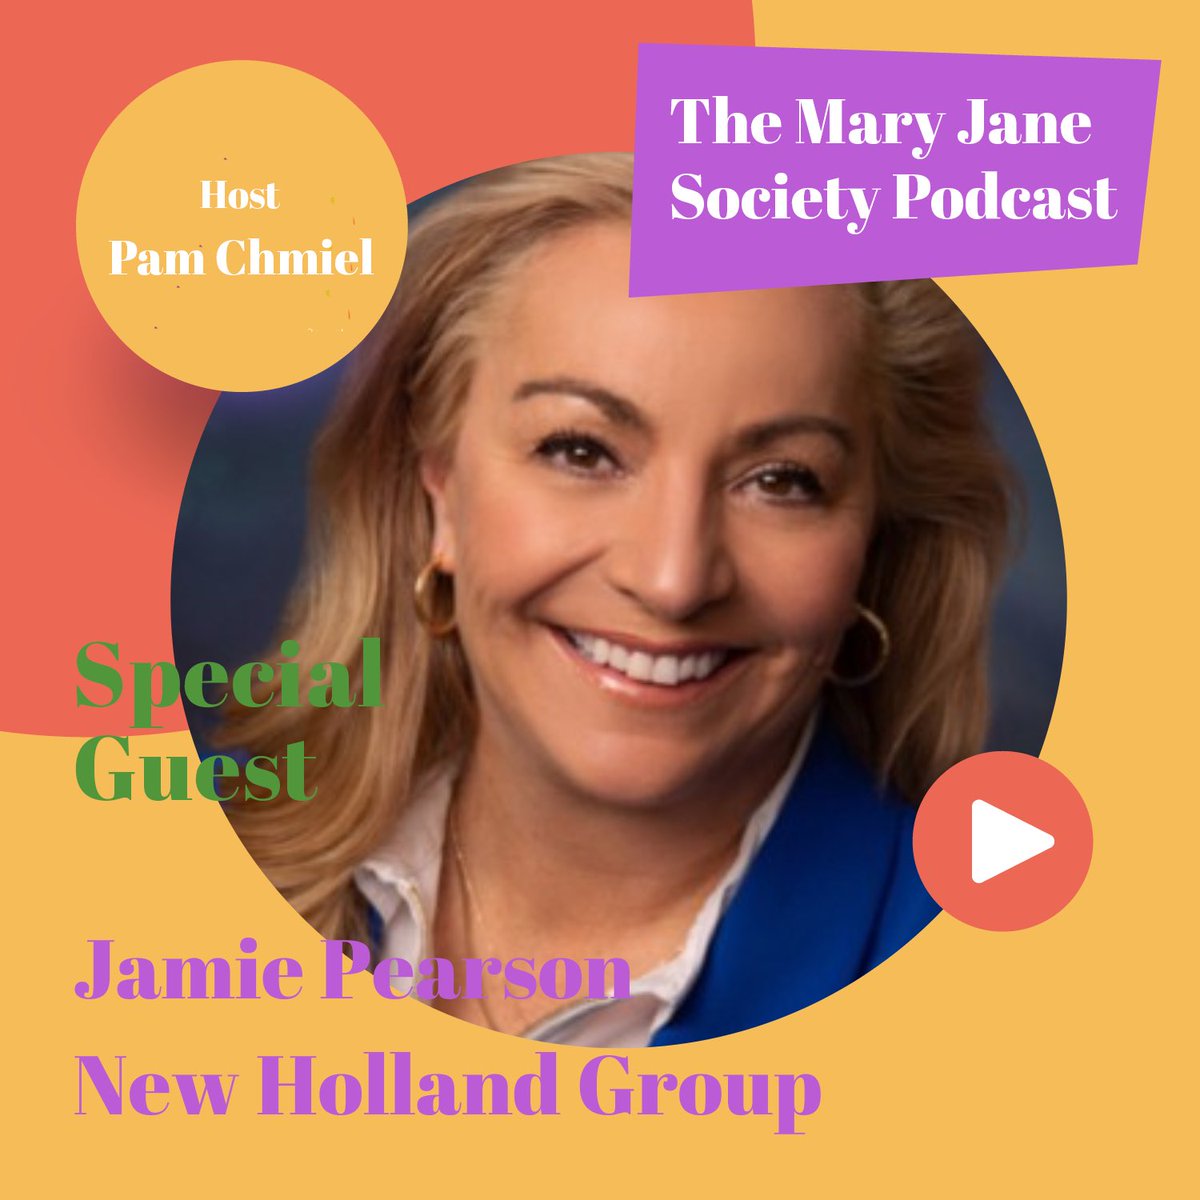 More about Europe in my interview with Jamie Pearson. She is known for leading the West Coast-infused chocolate bar brand Bhang, and is now a regular speaker at B2B conferences sweeping the EU. She shares where she is bullish on the EU. Listen here: bit.ly/3H083IZ